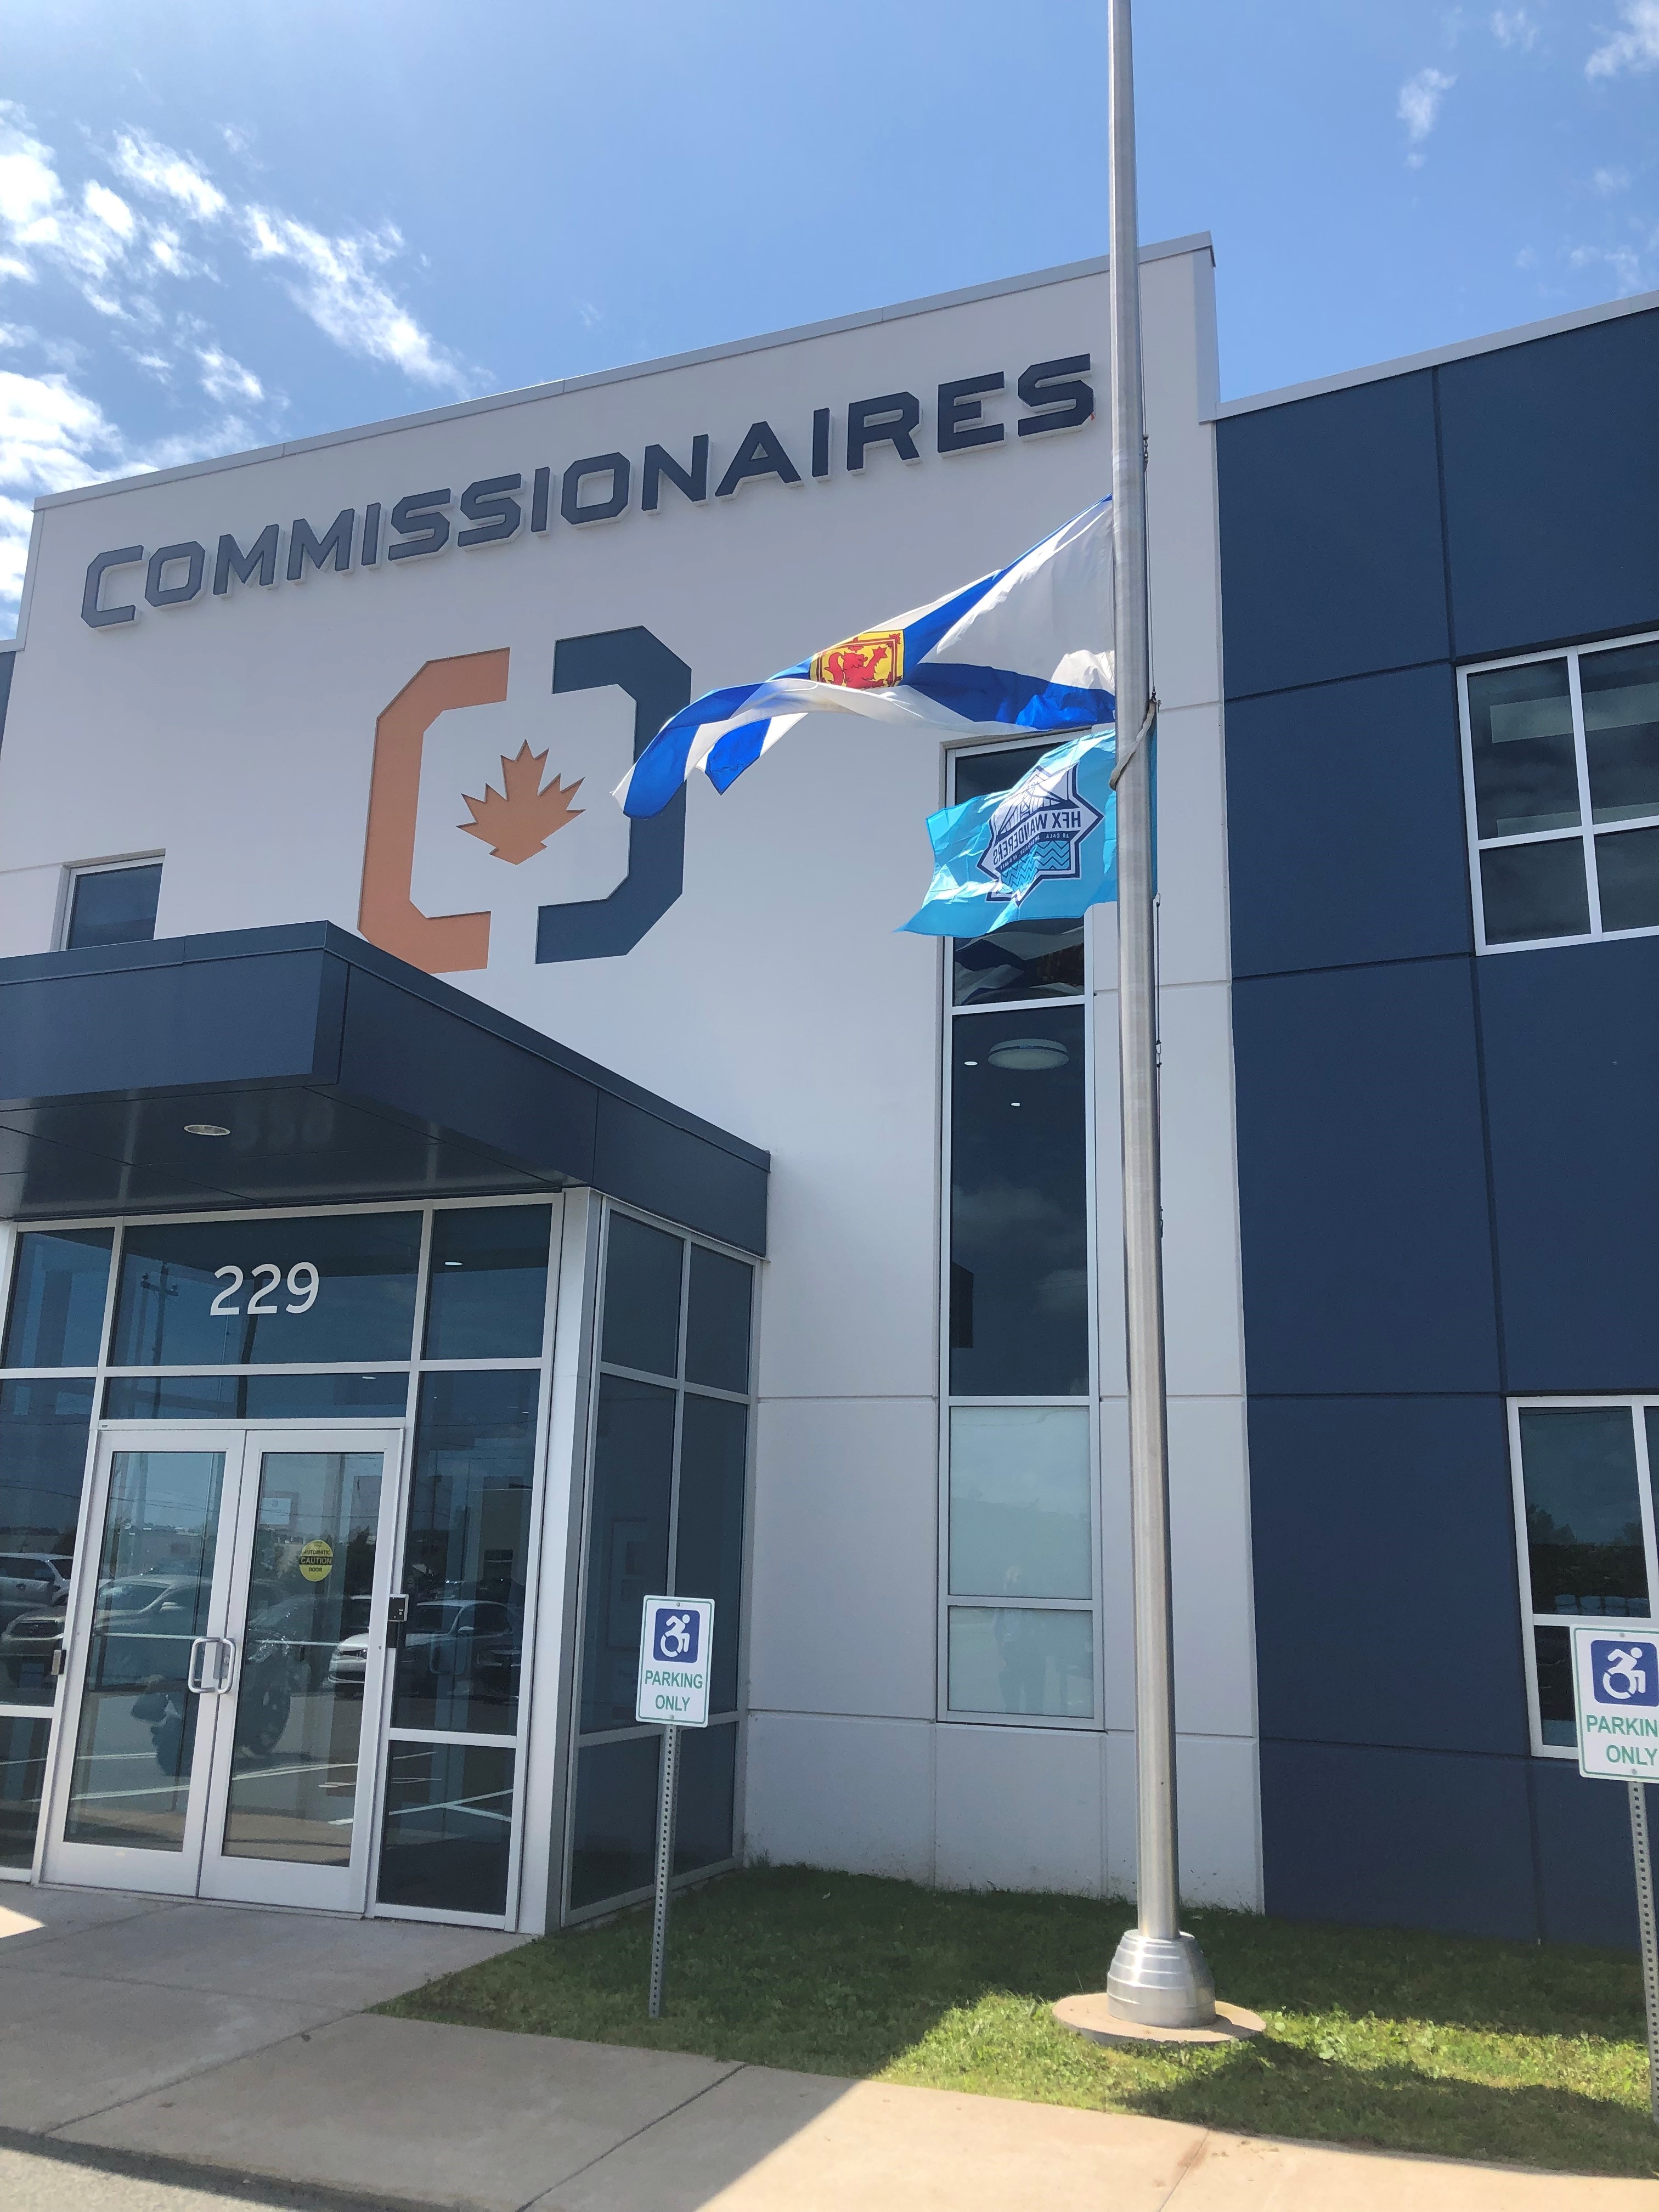 Wanderers and Commissionaires Flags